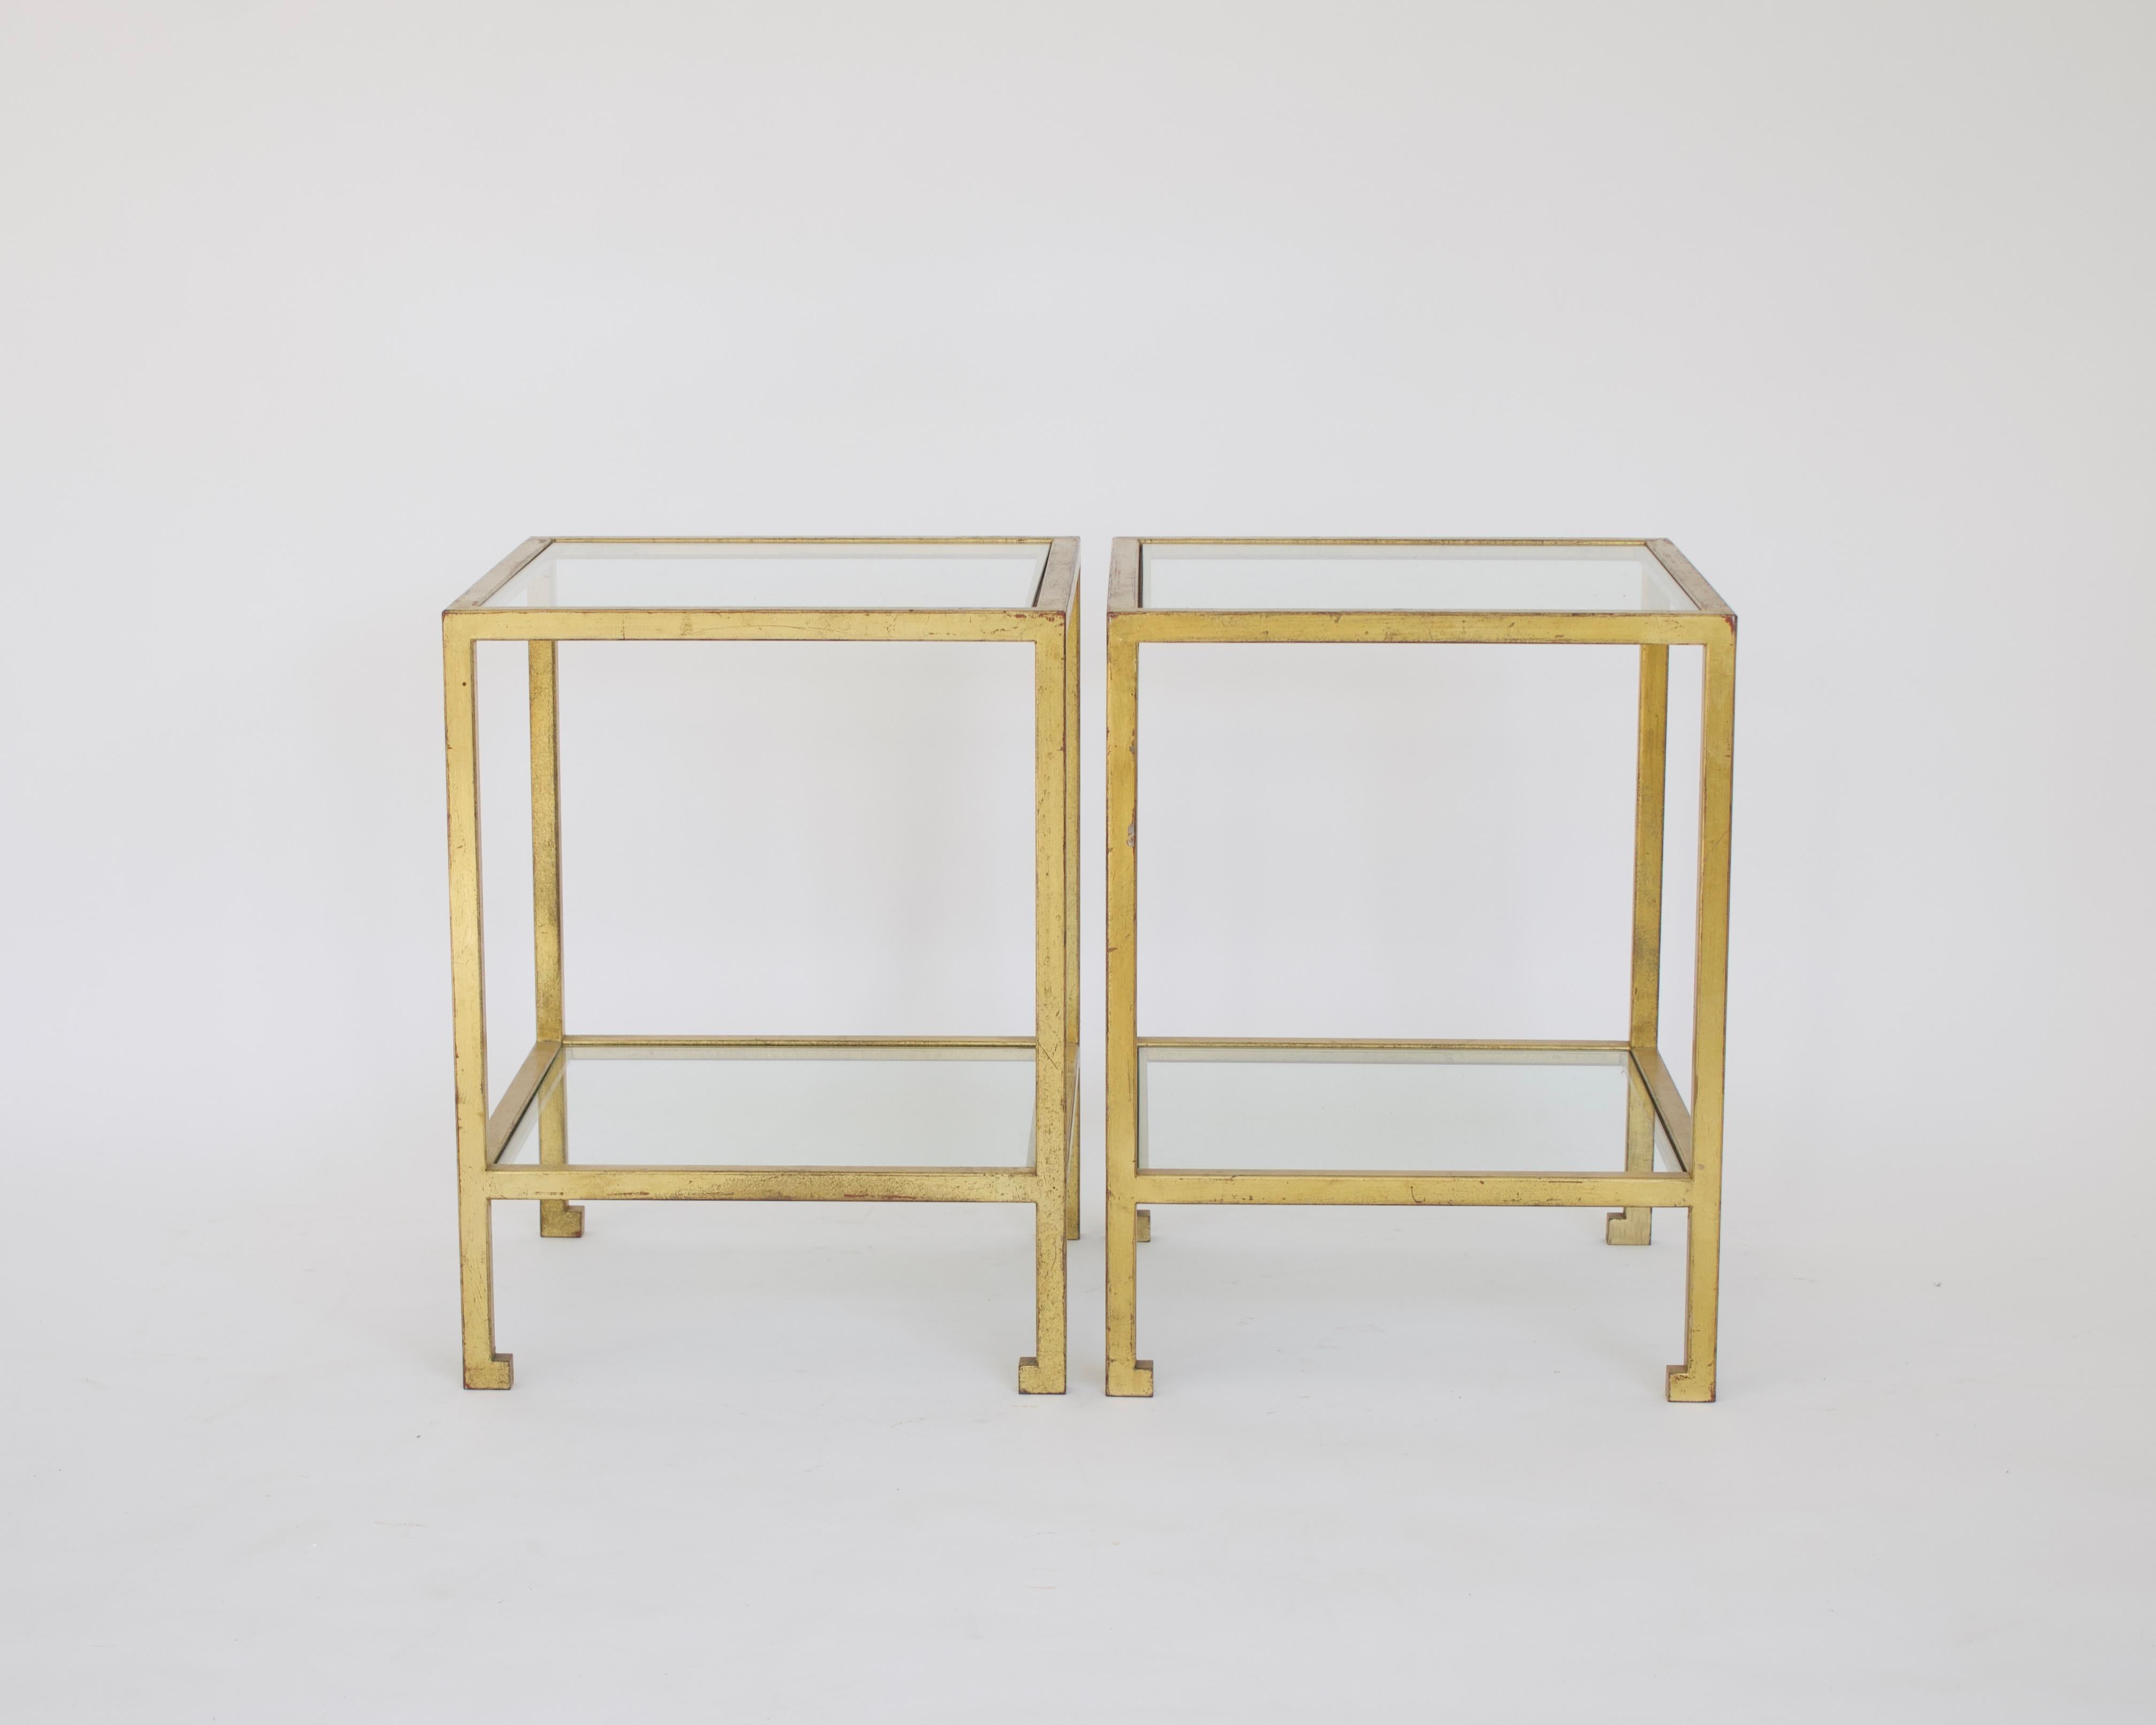 Roger Thibier French gilded wrought iron two level side or end tables with Neo classical feet. 
The total height is 20.5